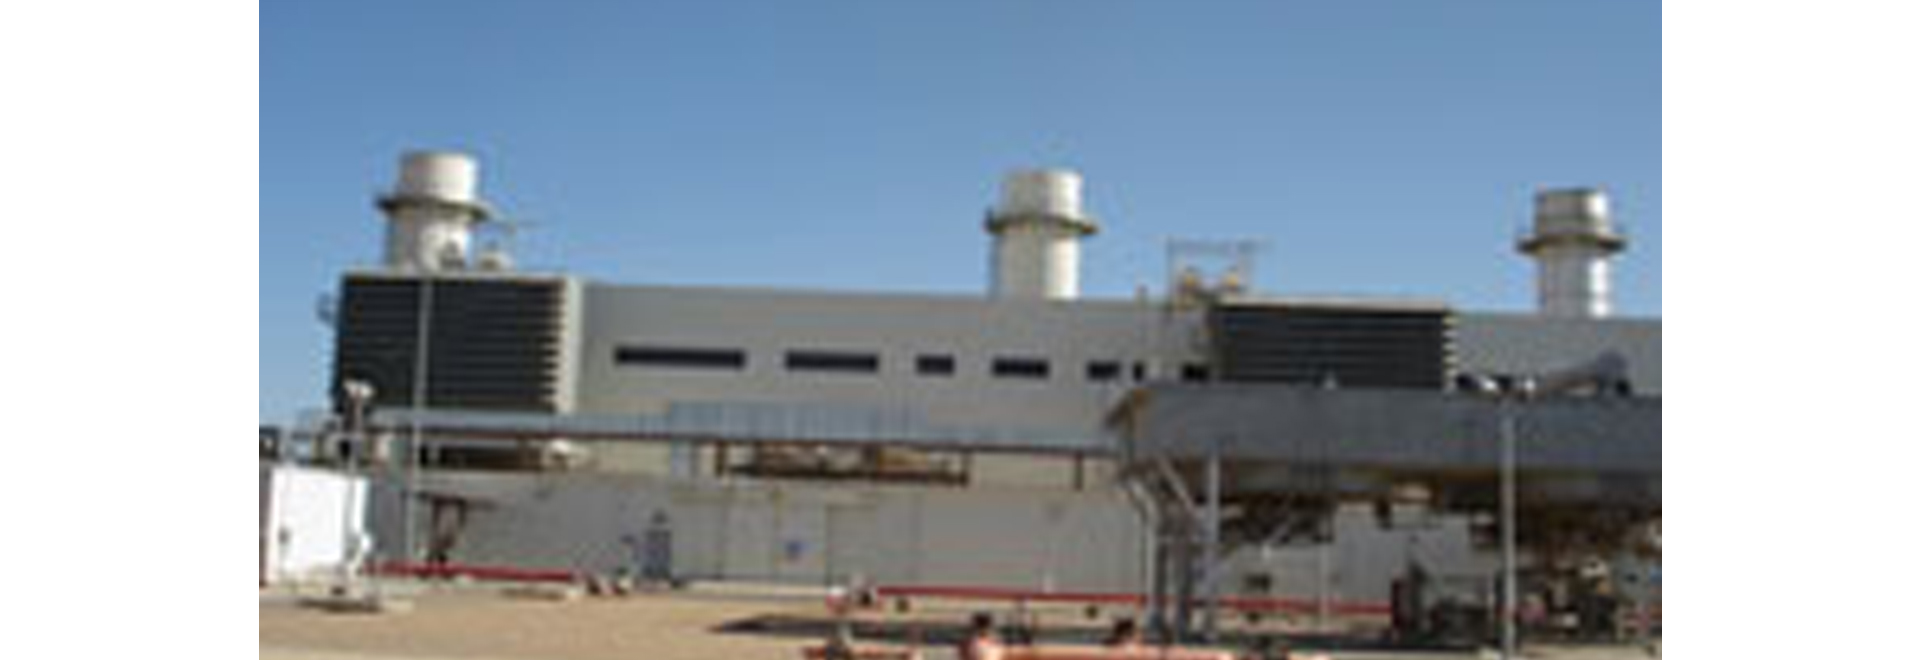 3 x 60 MW Tabouk Phase-2 for Power Plant (Saudi Arabia) – National Contracting Company Limited